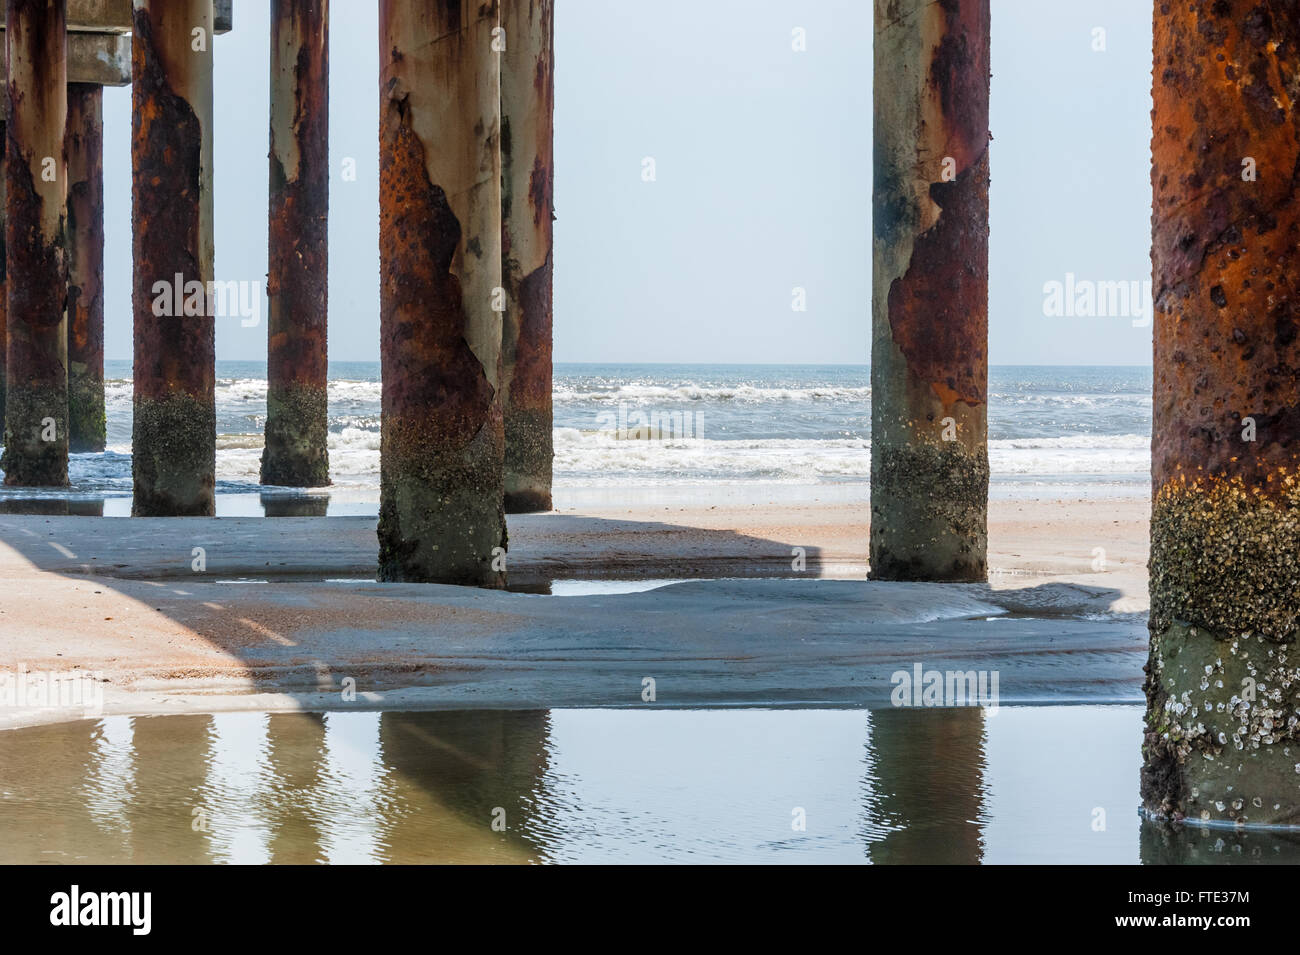 Ocean view through rusted pilings at St. Augustine Pier in St. Augustine, Florida, USA. Stock Photo